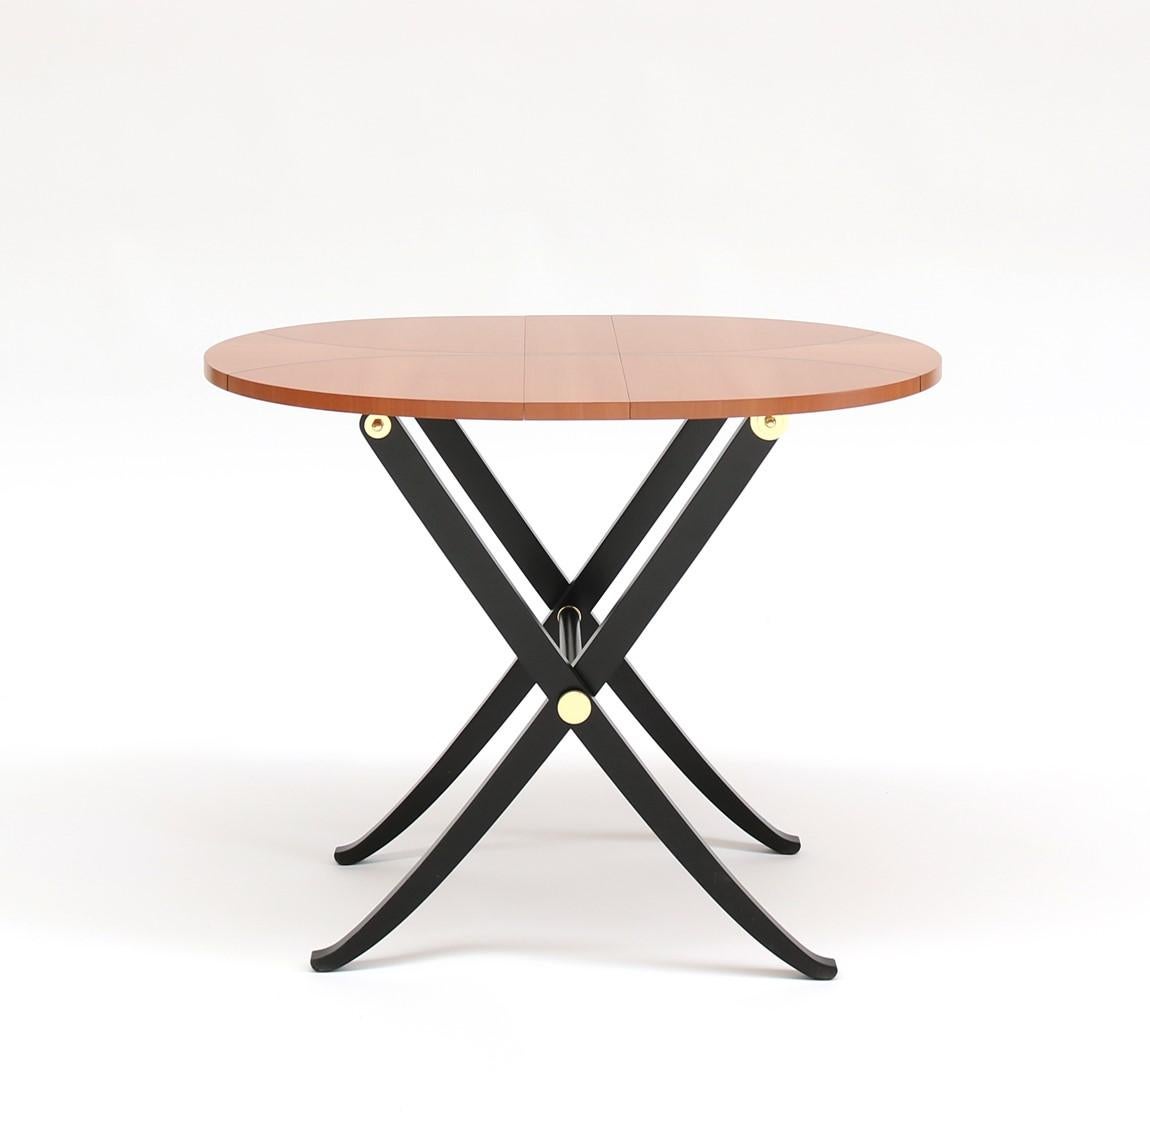 Foldable oval coffee table, made of pearwood. This wood has a delicate pinkish color that contrasts with the black lacquer of the legs. The top is divided into three parts to allow the folding and it is decorated with an ebony inlay drawing a curved